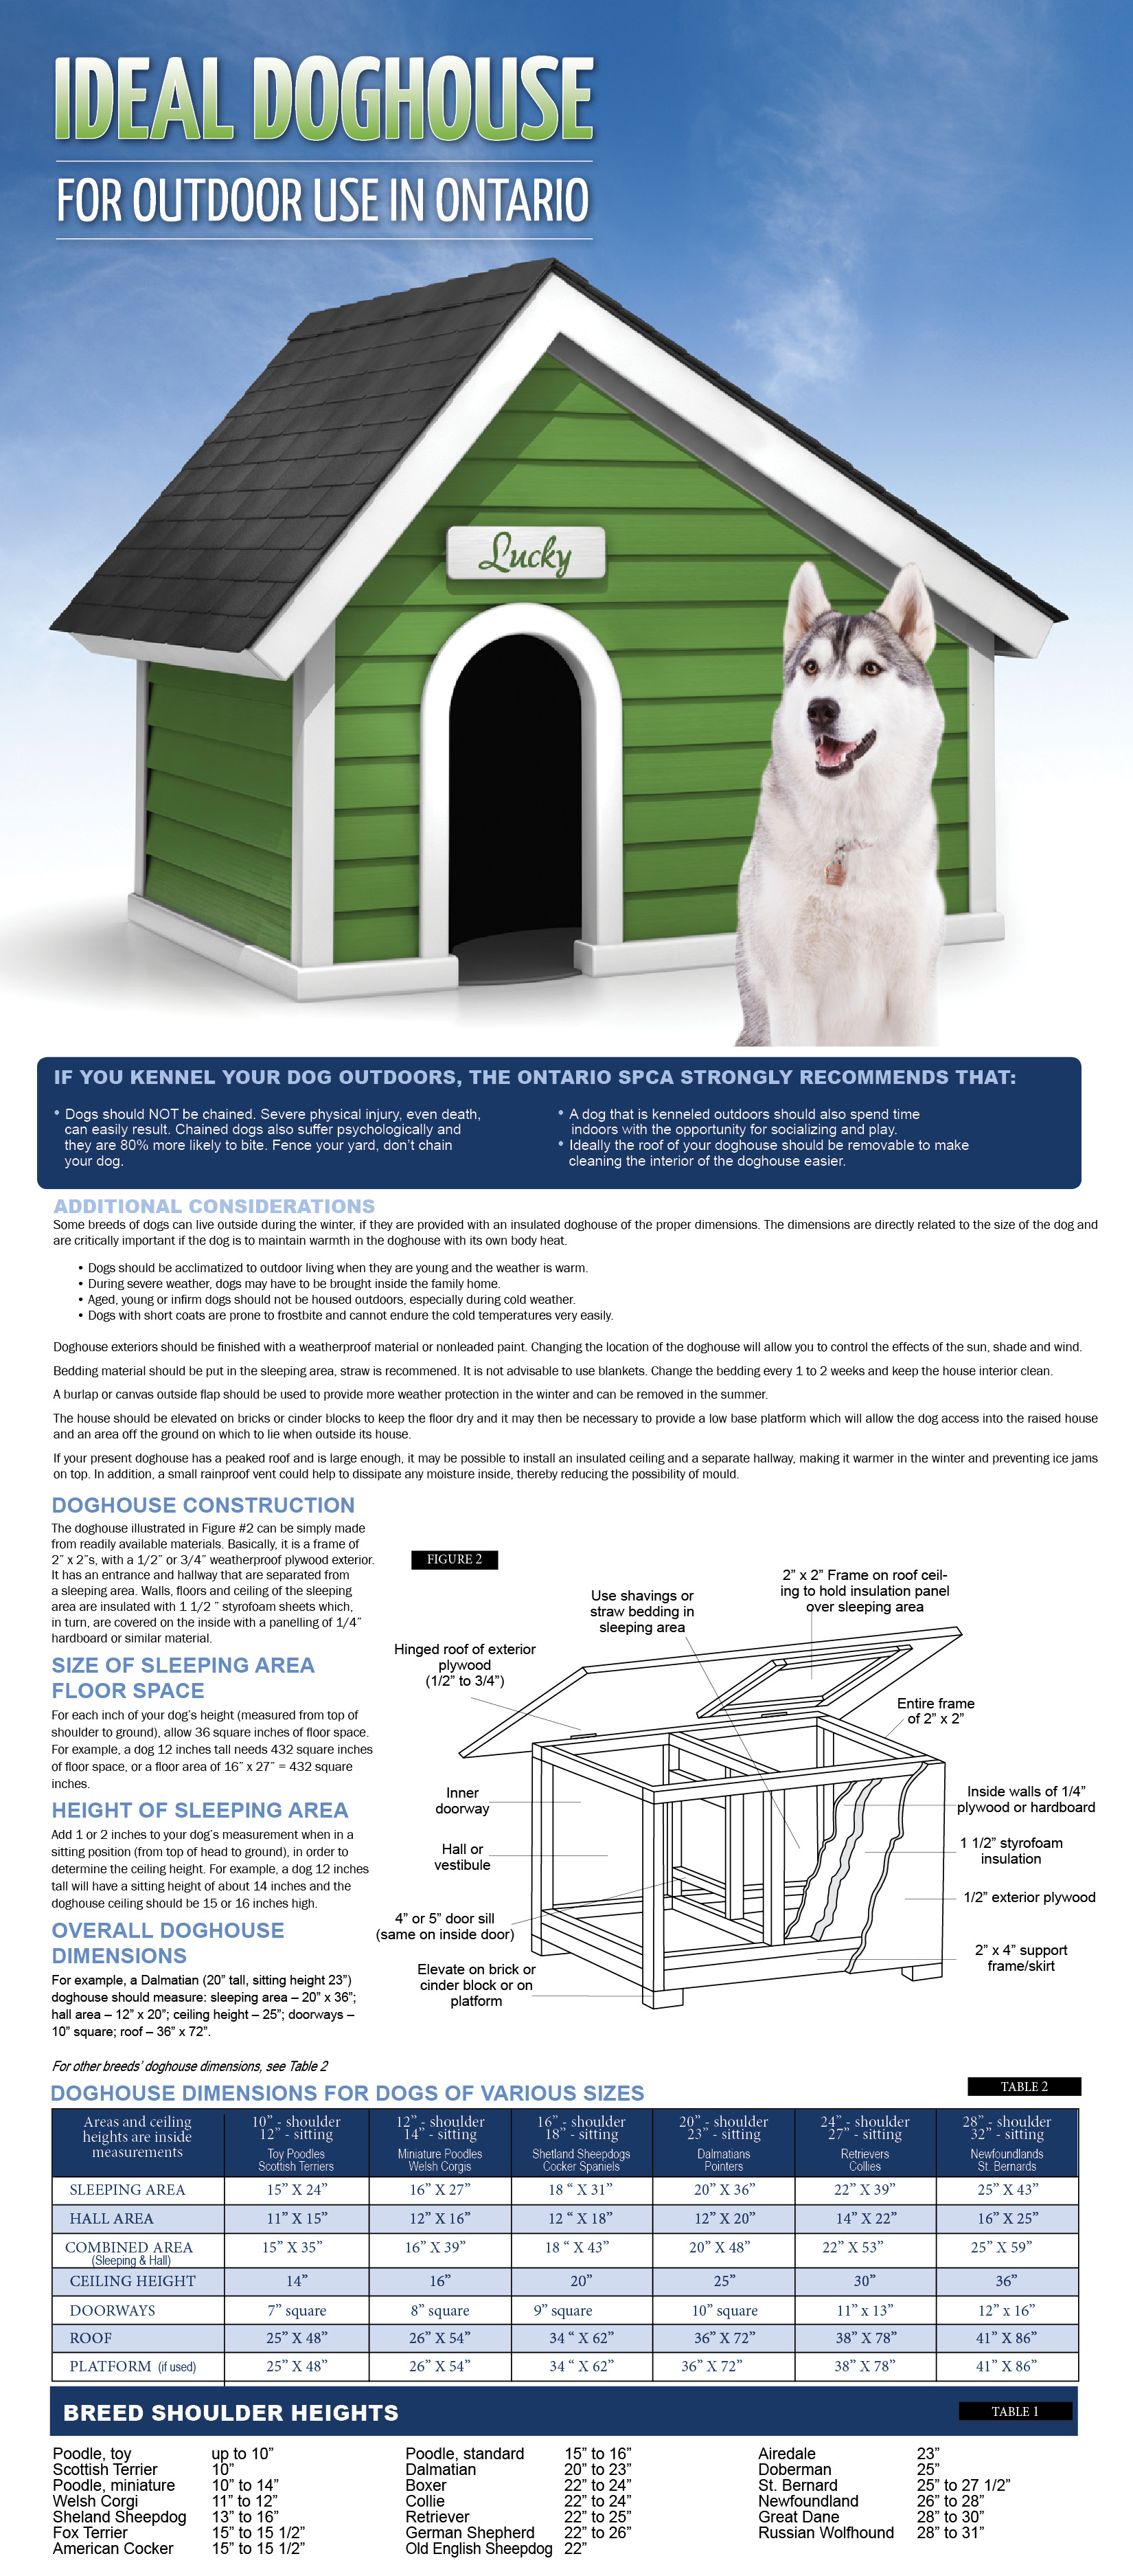 keeping a dog outside in a kennel